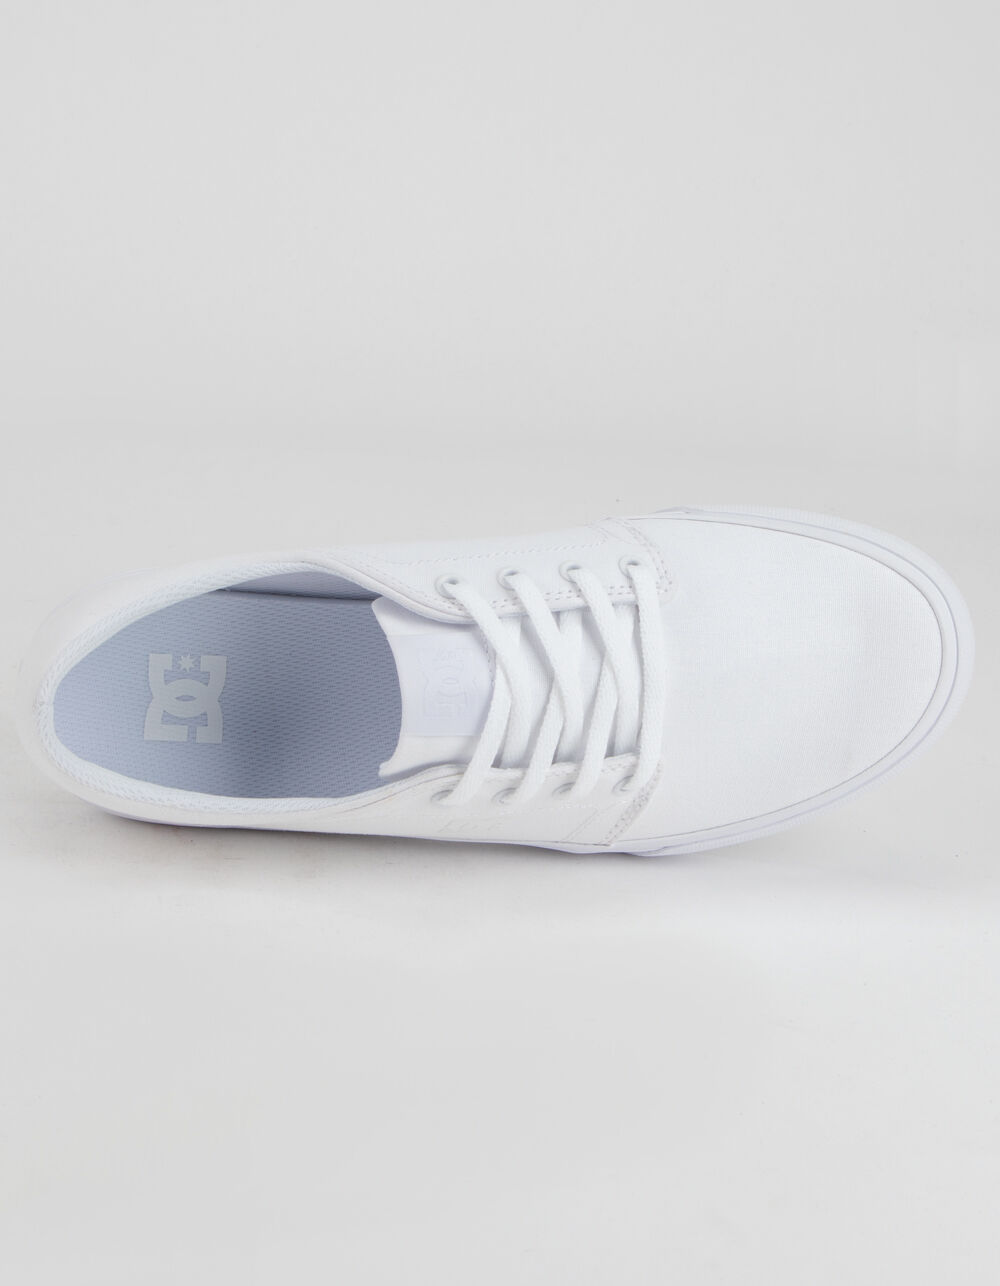 DC SHOES Trase TX Mens Shoes image number 2